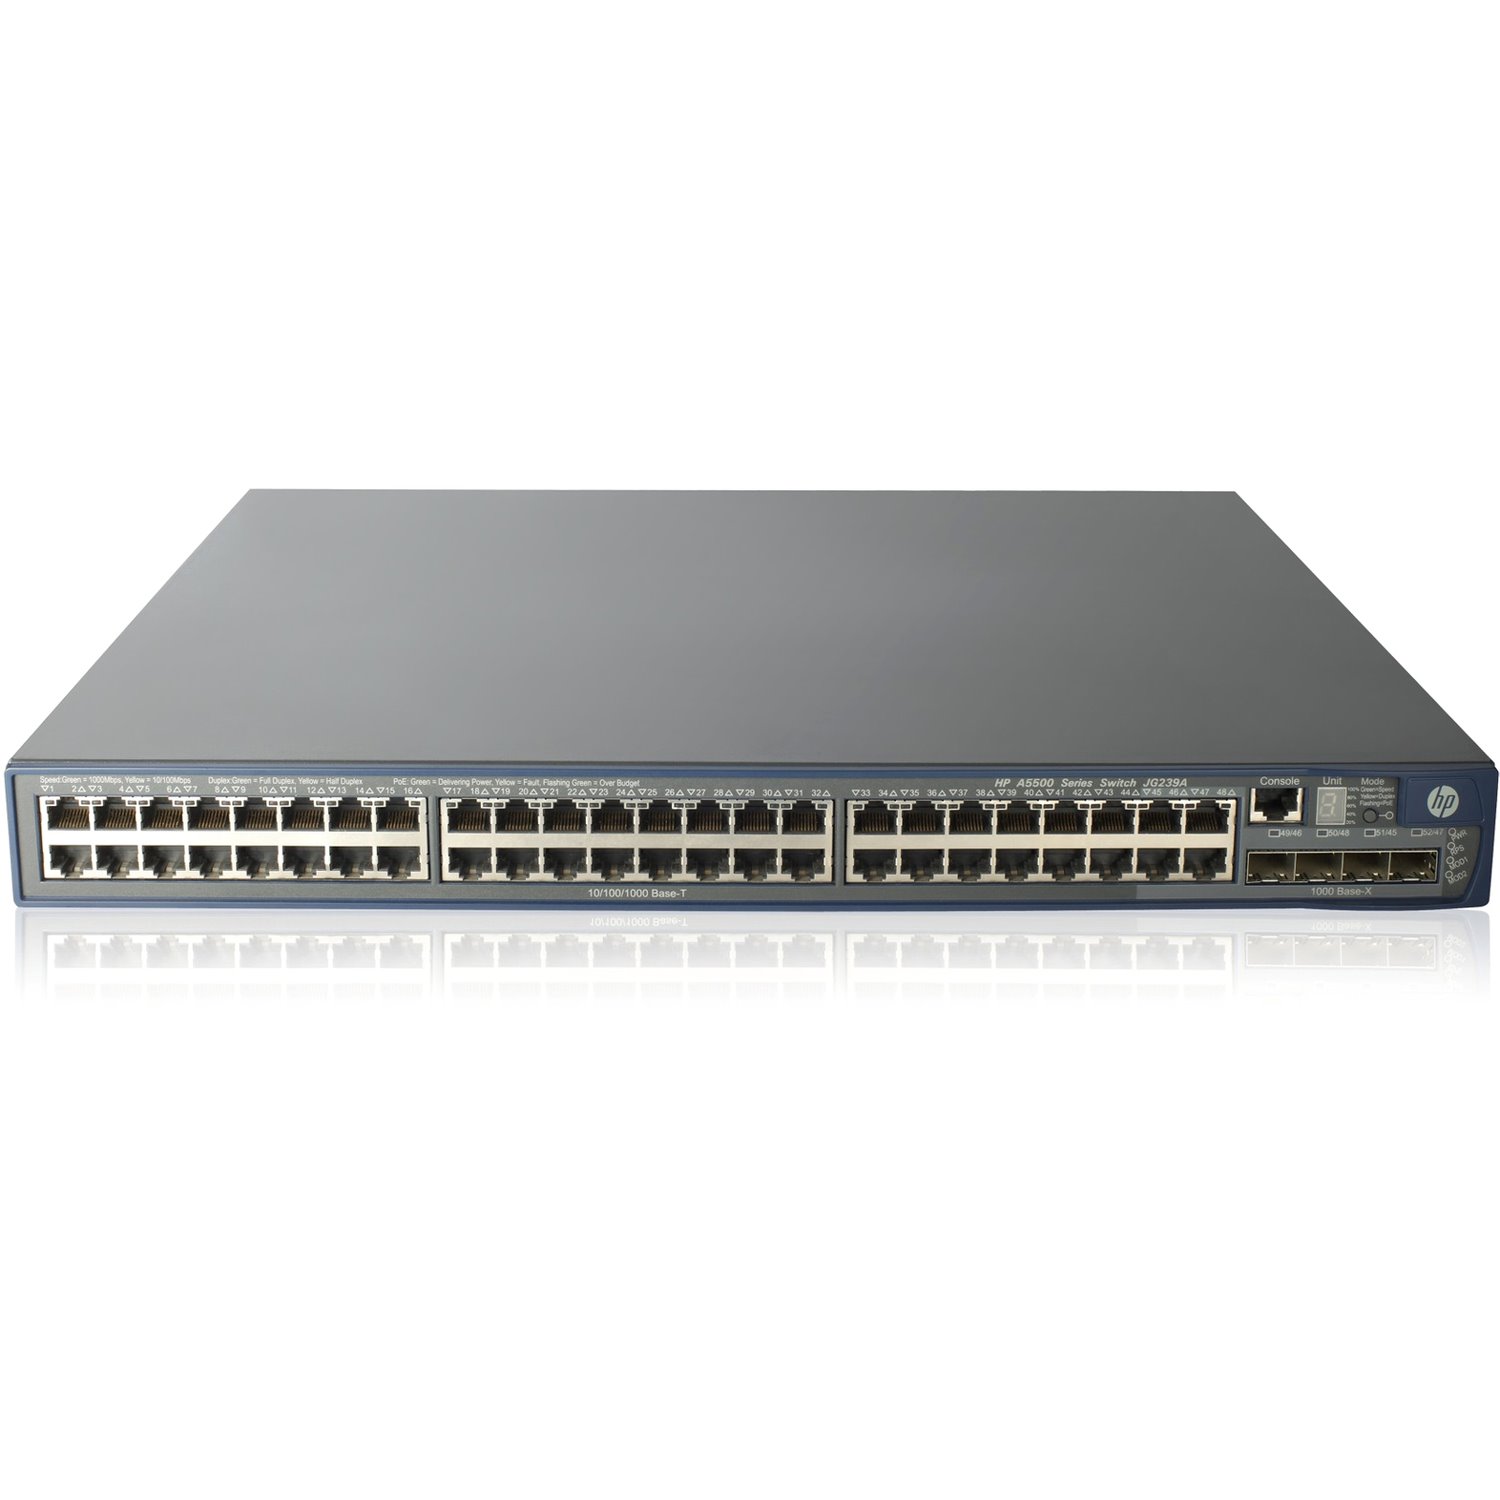 HPE Sourcing 5500-48G-PoE+-4SFP HI Switch with 2 Interface Slots